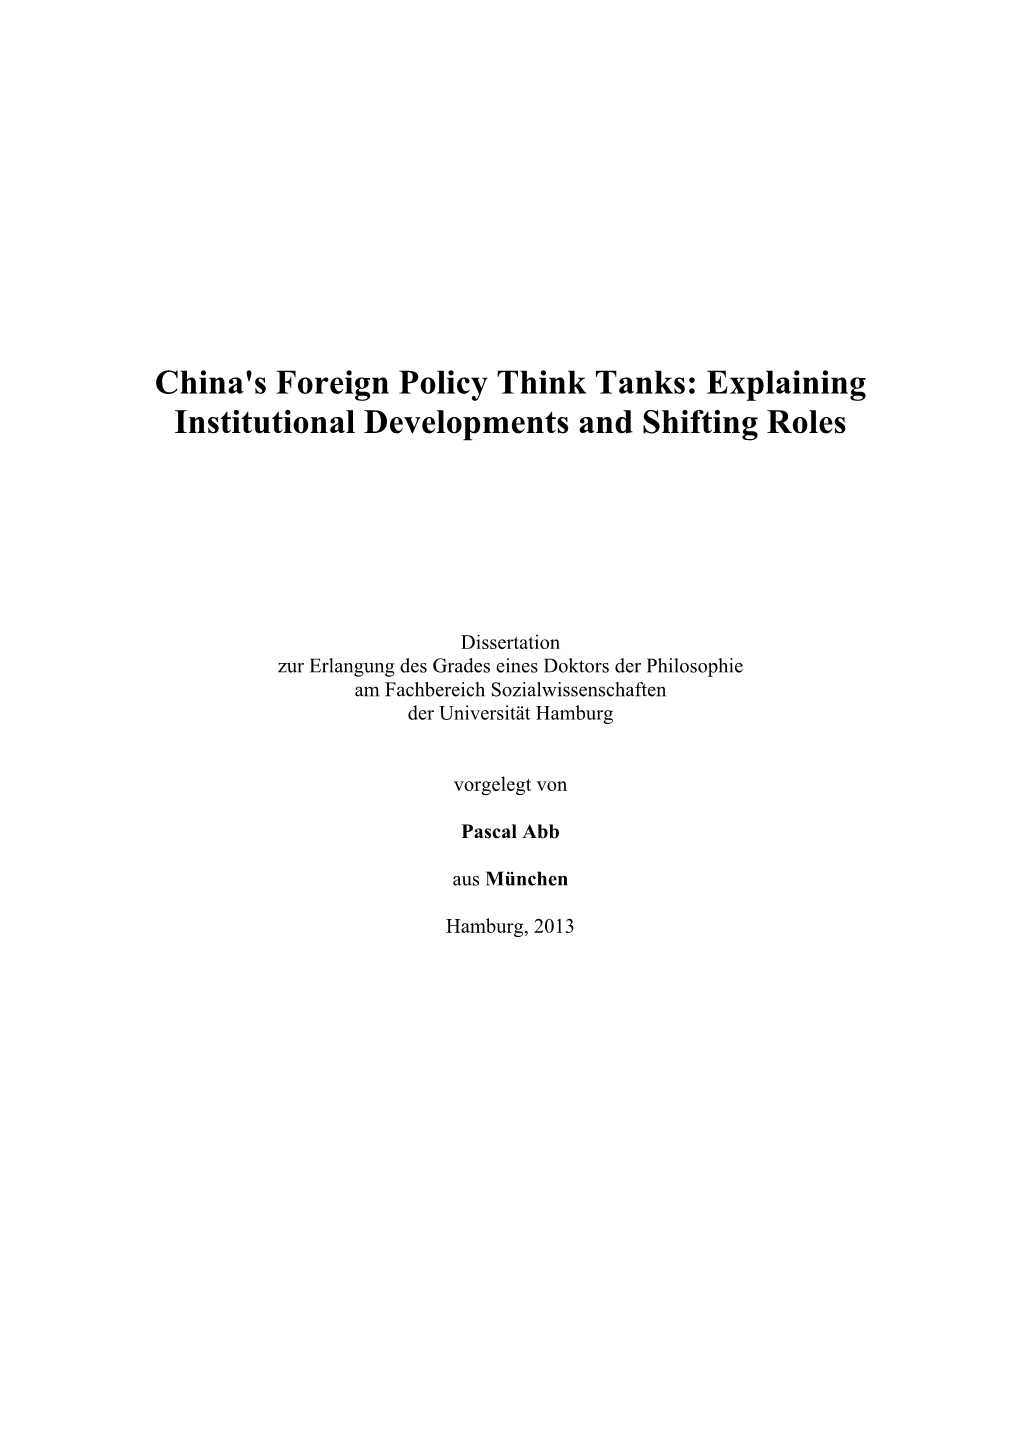 China's Foreign Policy Think Tanks: Explaining Institutional Developments and Shifting Roles